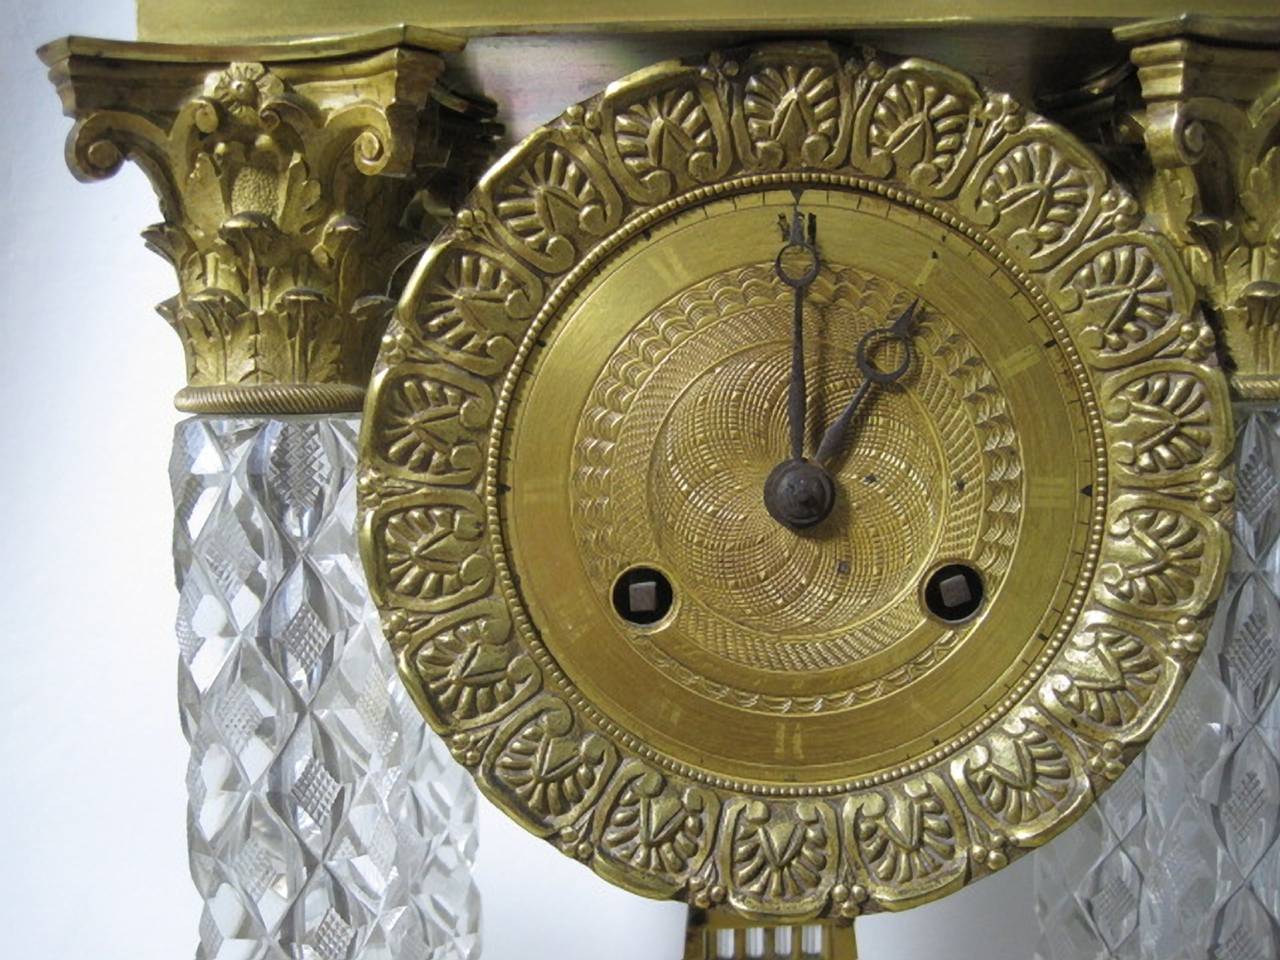 Baccarat Crystal Clock Garniture, French Empire with Gilt Bronze In Good Condition For Sale In Hamilton, Ontario